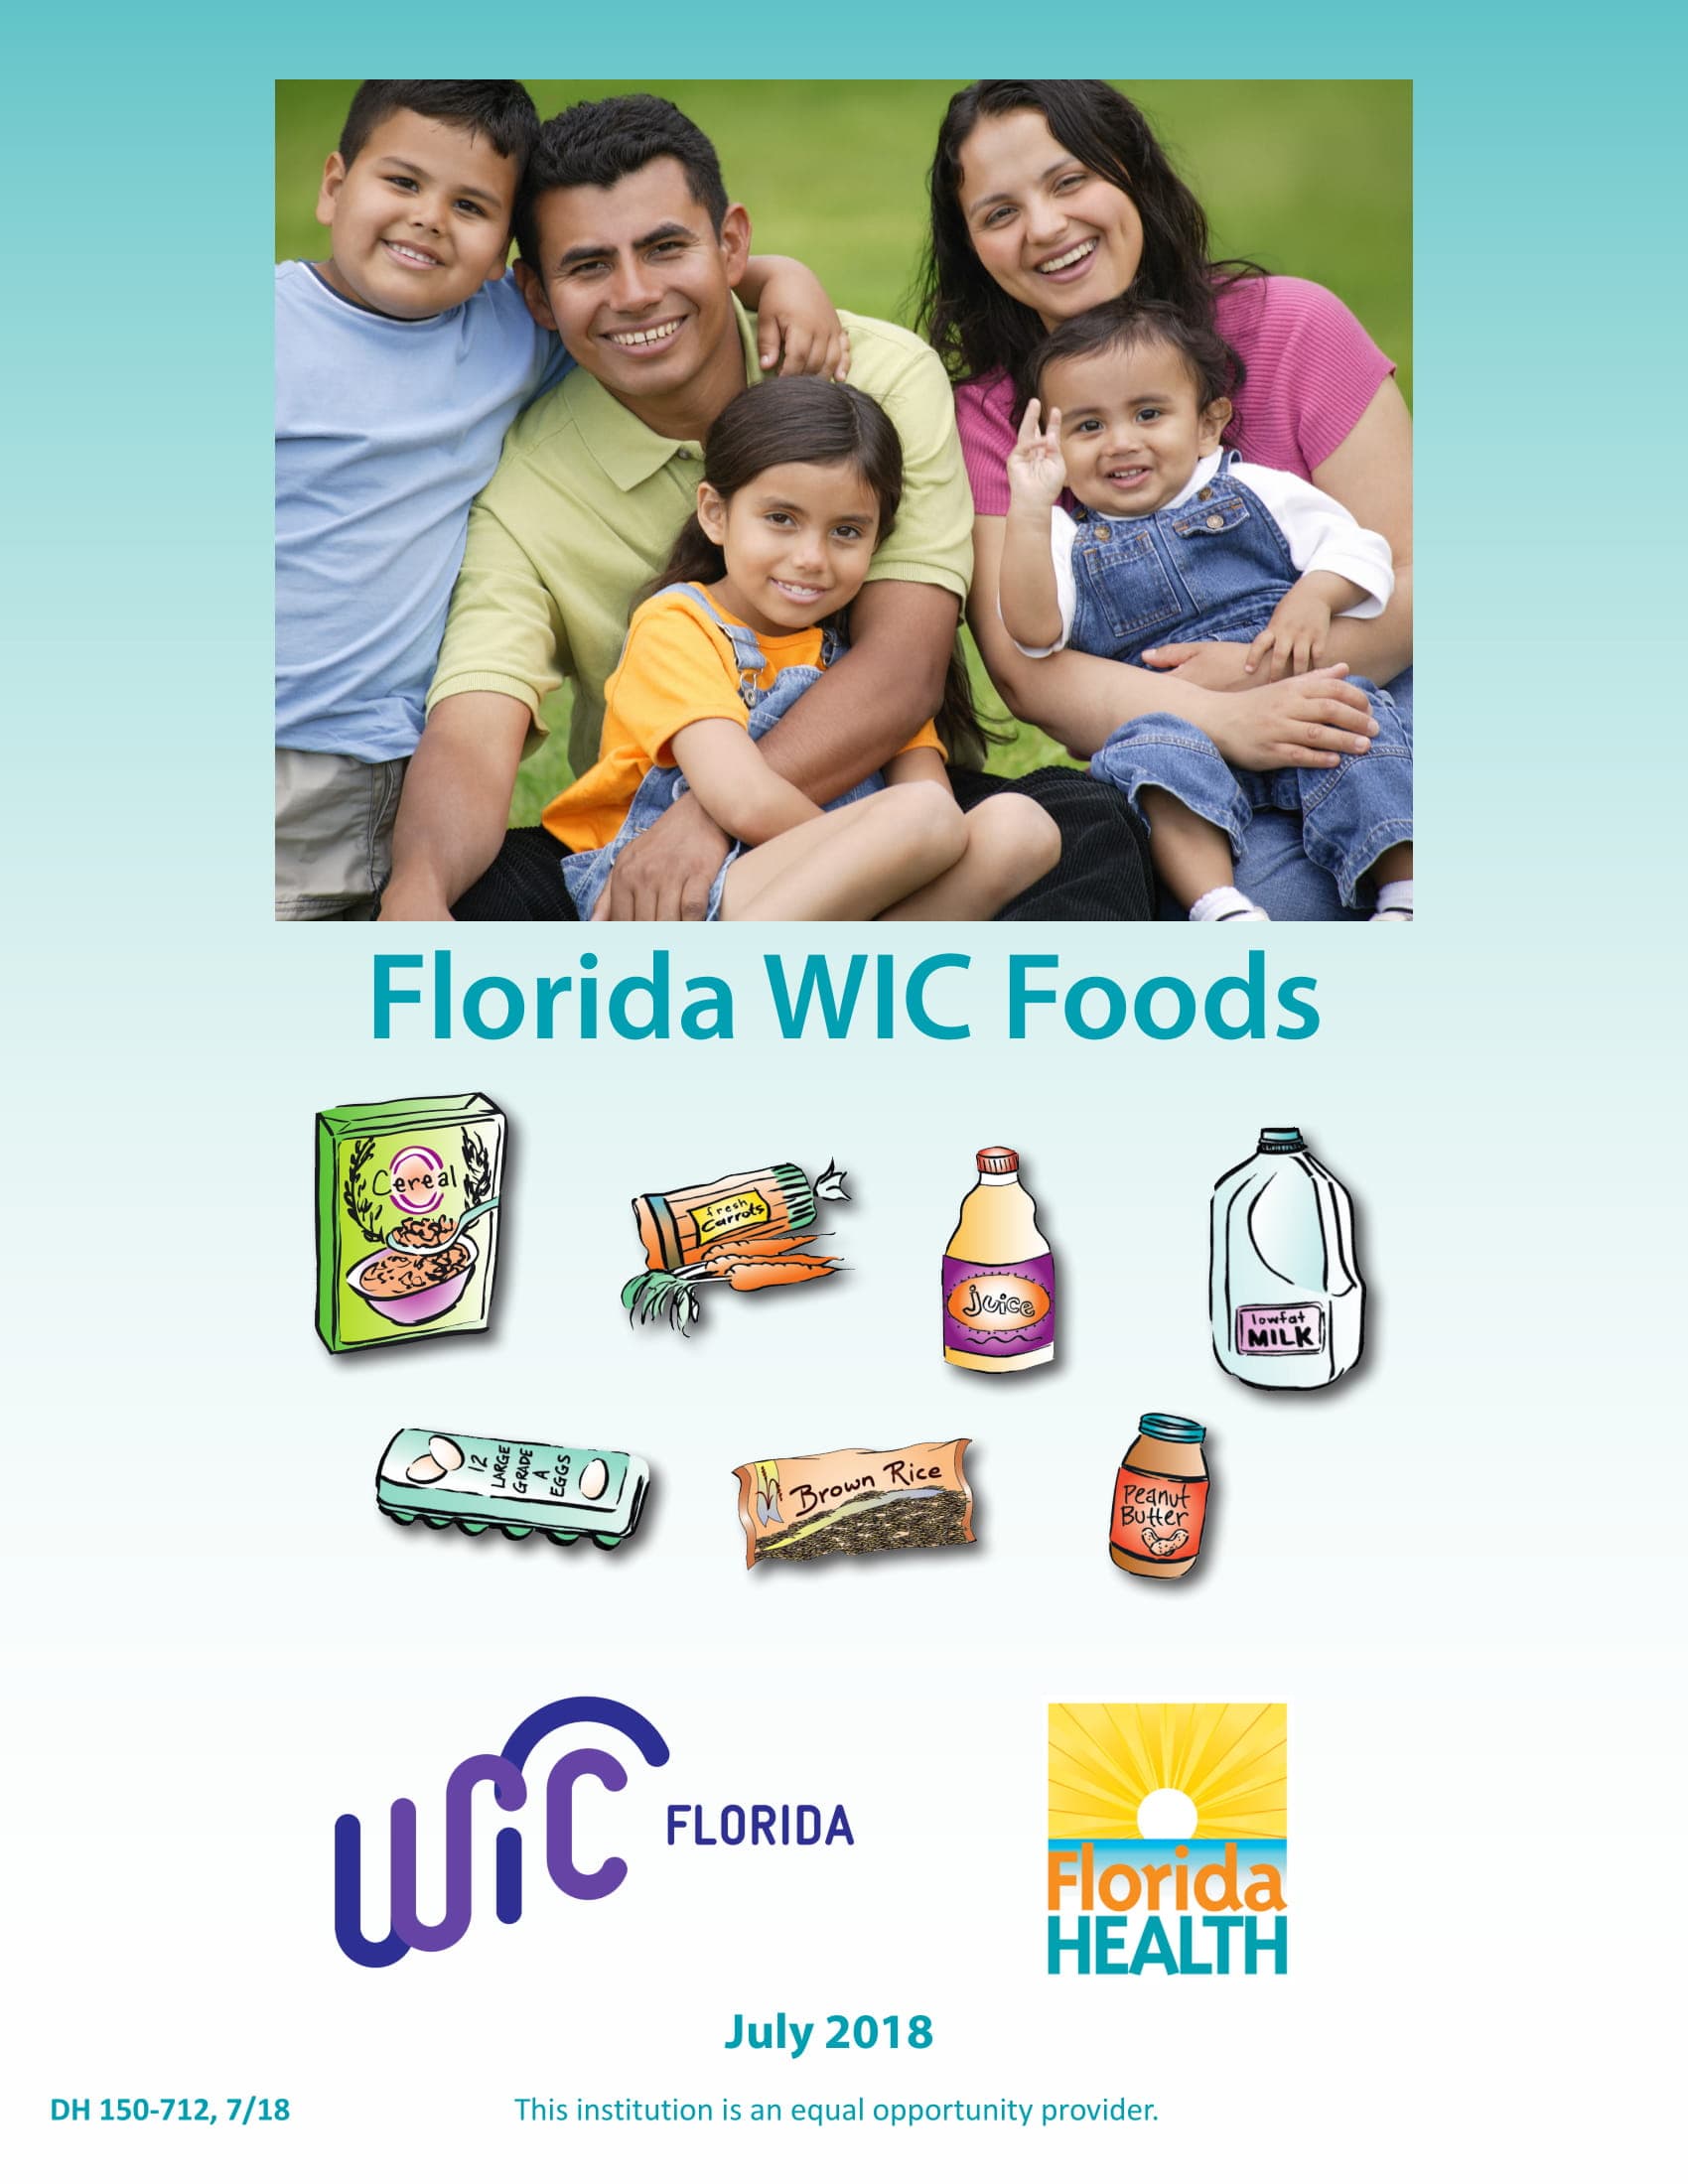 what foods are wic approved